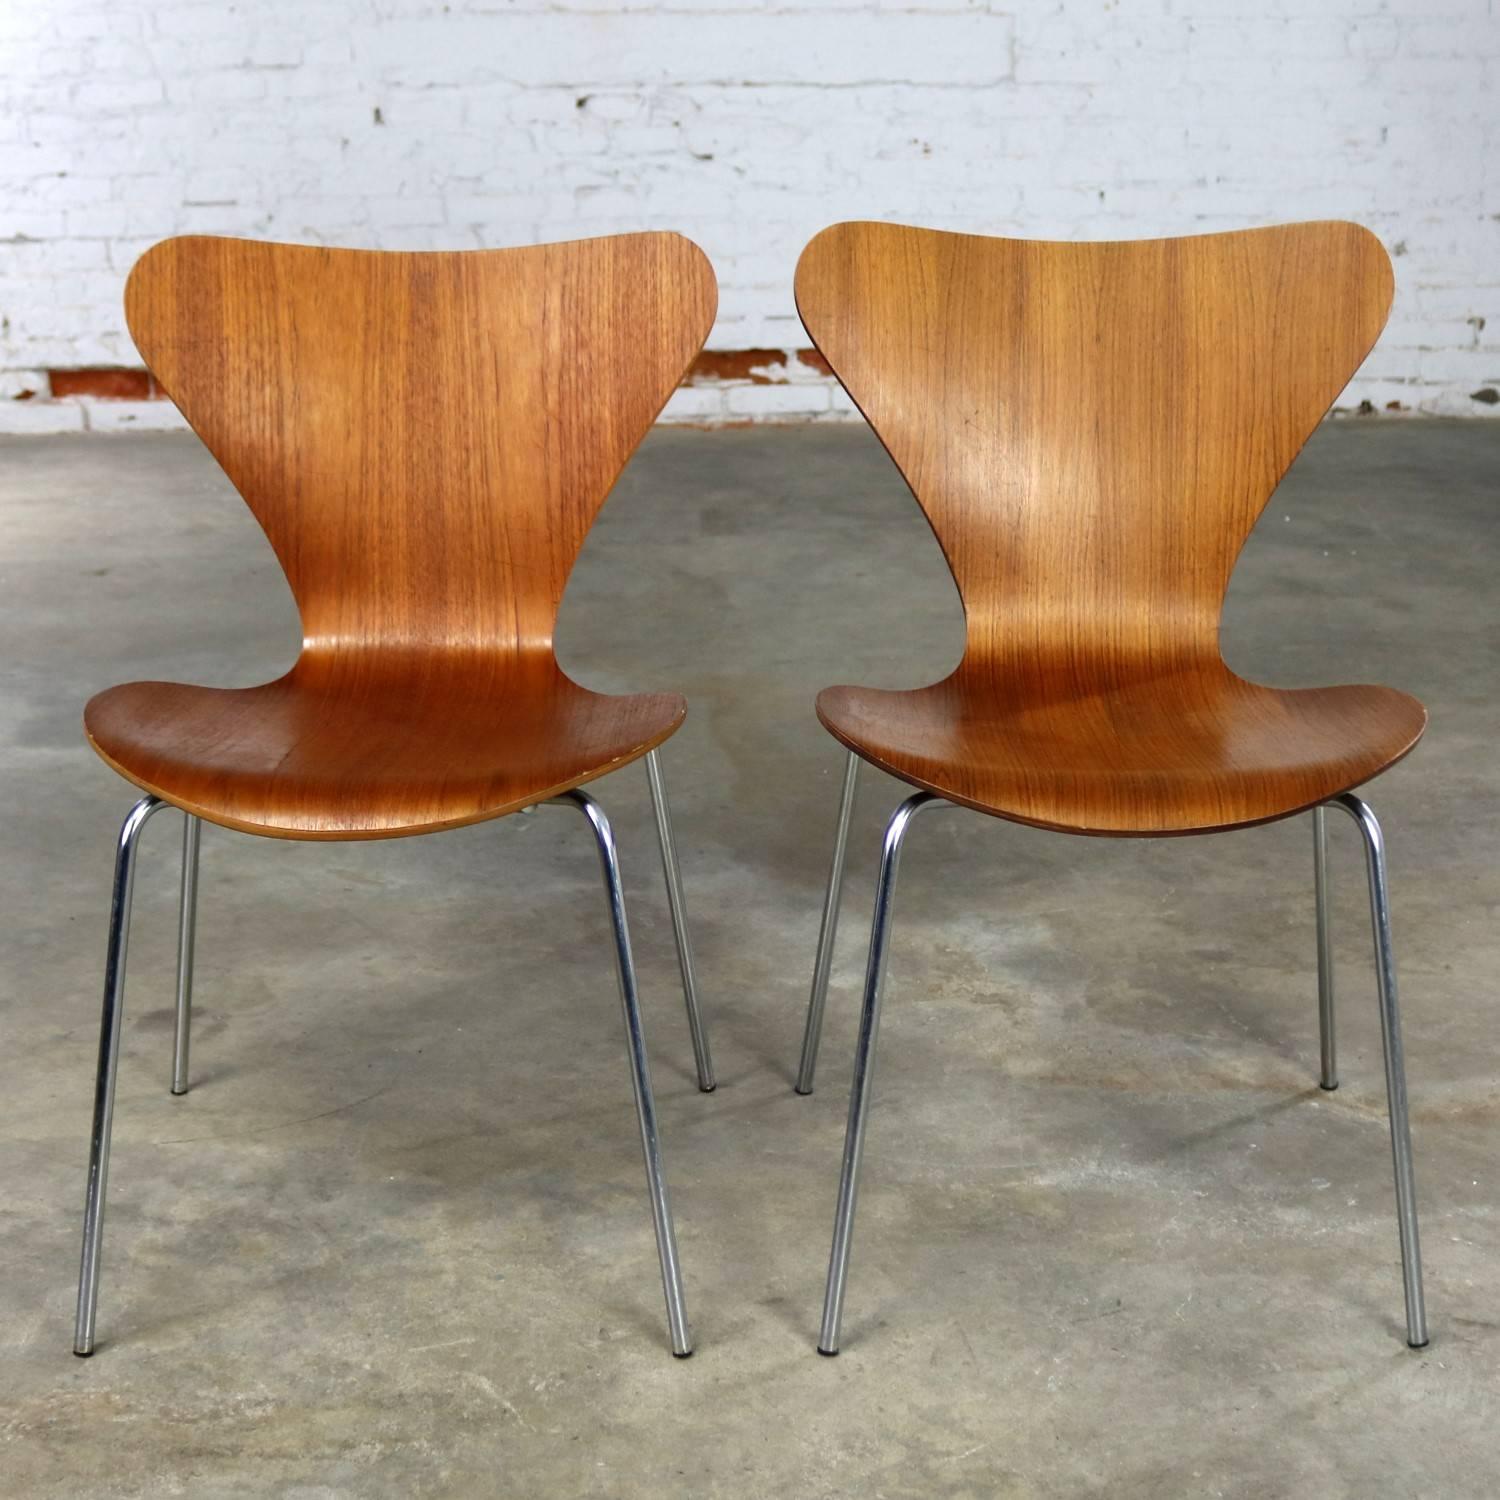 Pair of vintage MCM Series 7 Model 3107 molded teak chairs with chrome legs designed by Arne Jacobsen for Fritz Hansen in 1955. This pair is in wonderful vintage condition with age appropriate wear. One chair retains its original plastic bowl shaped